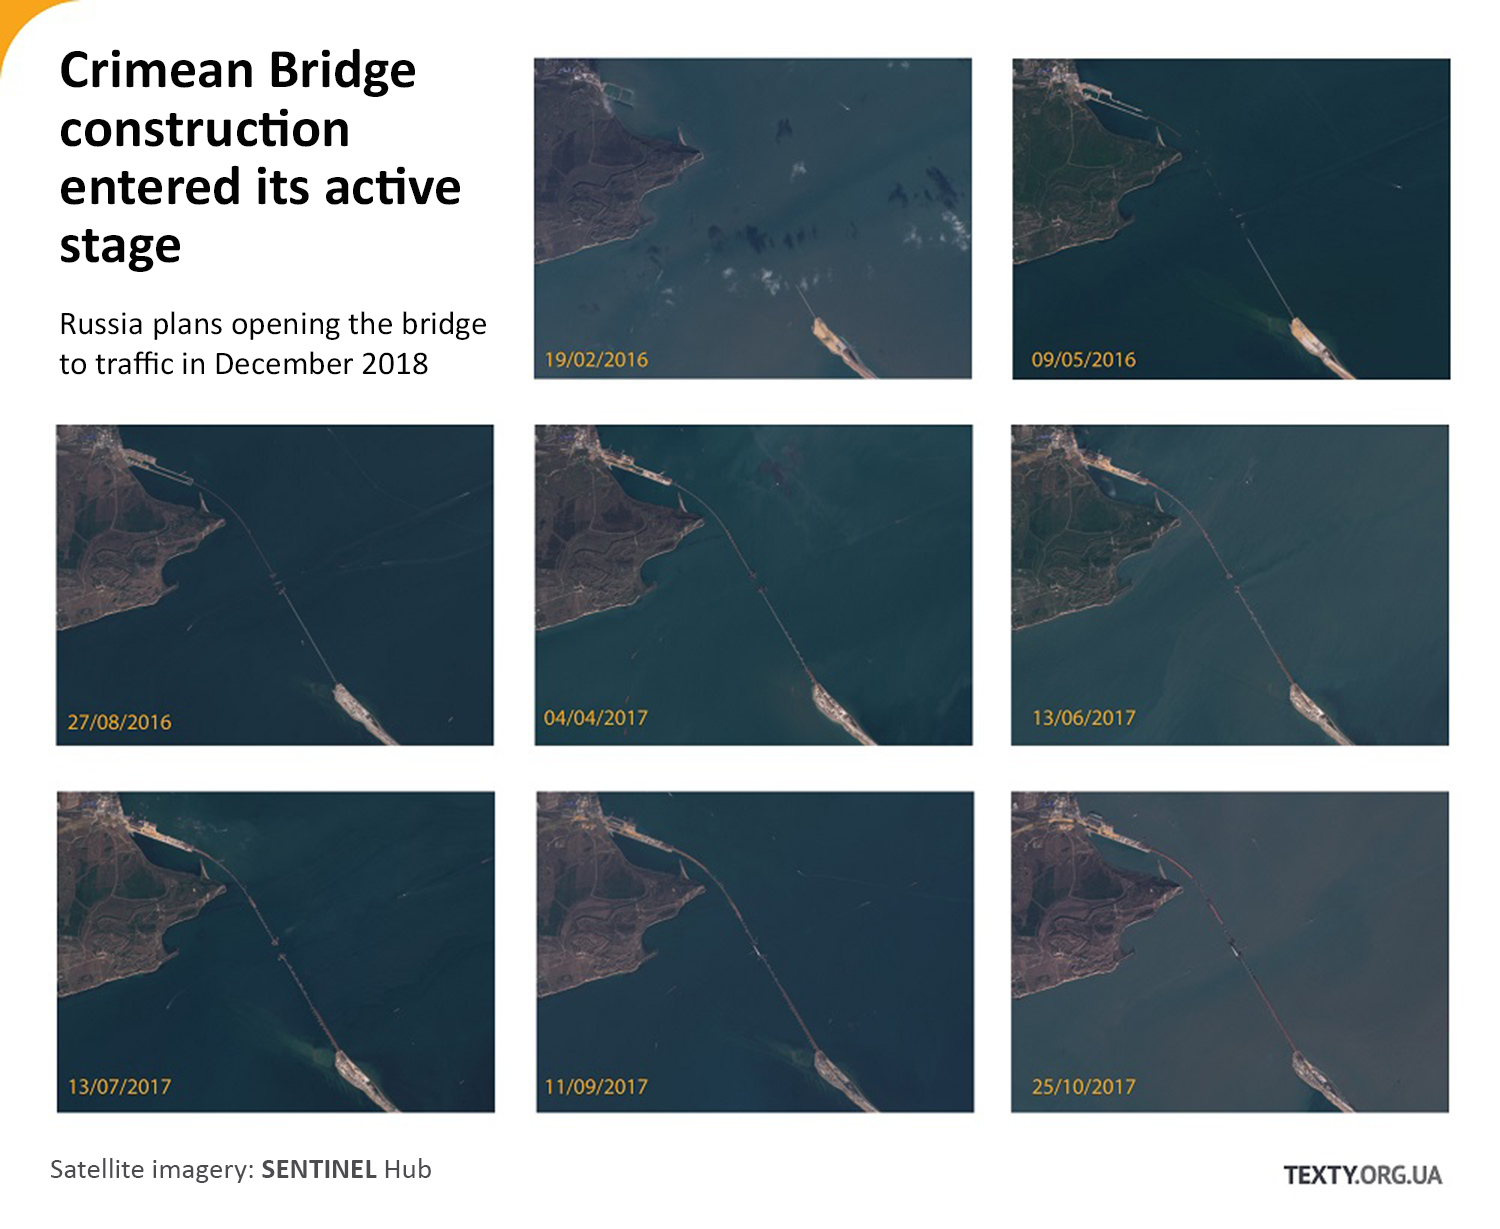 SENTINEL satellite imagery shows the progress since February 2016 of the Russia's illegal construction of its bridge to occupied Crimea to connect the peninsula to Russia's Krasnodar Krai region. Image: texty.org.ua. Download high-resolution image.